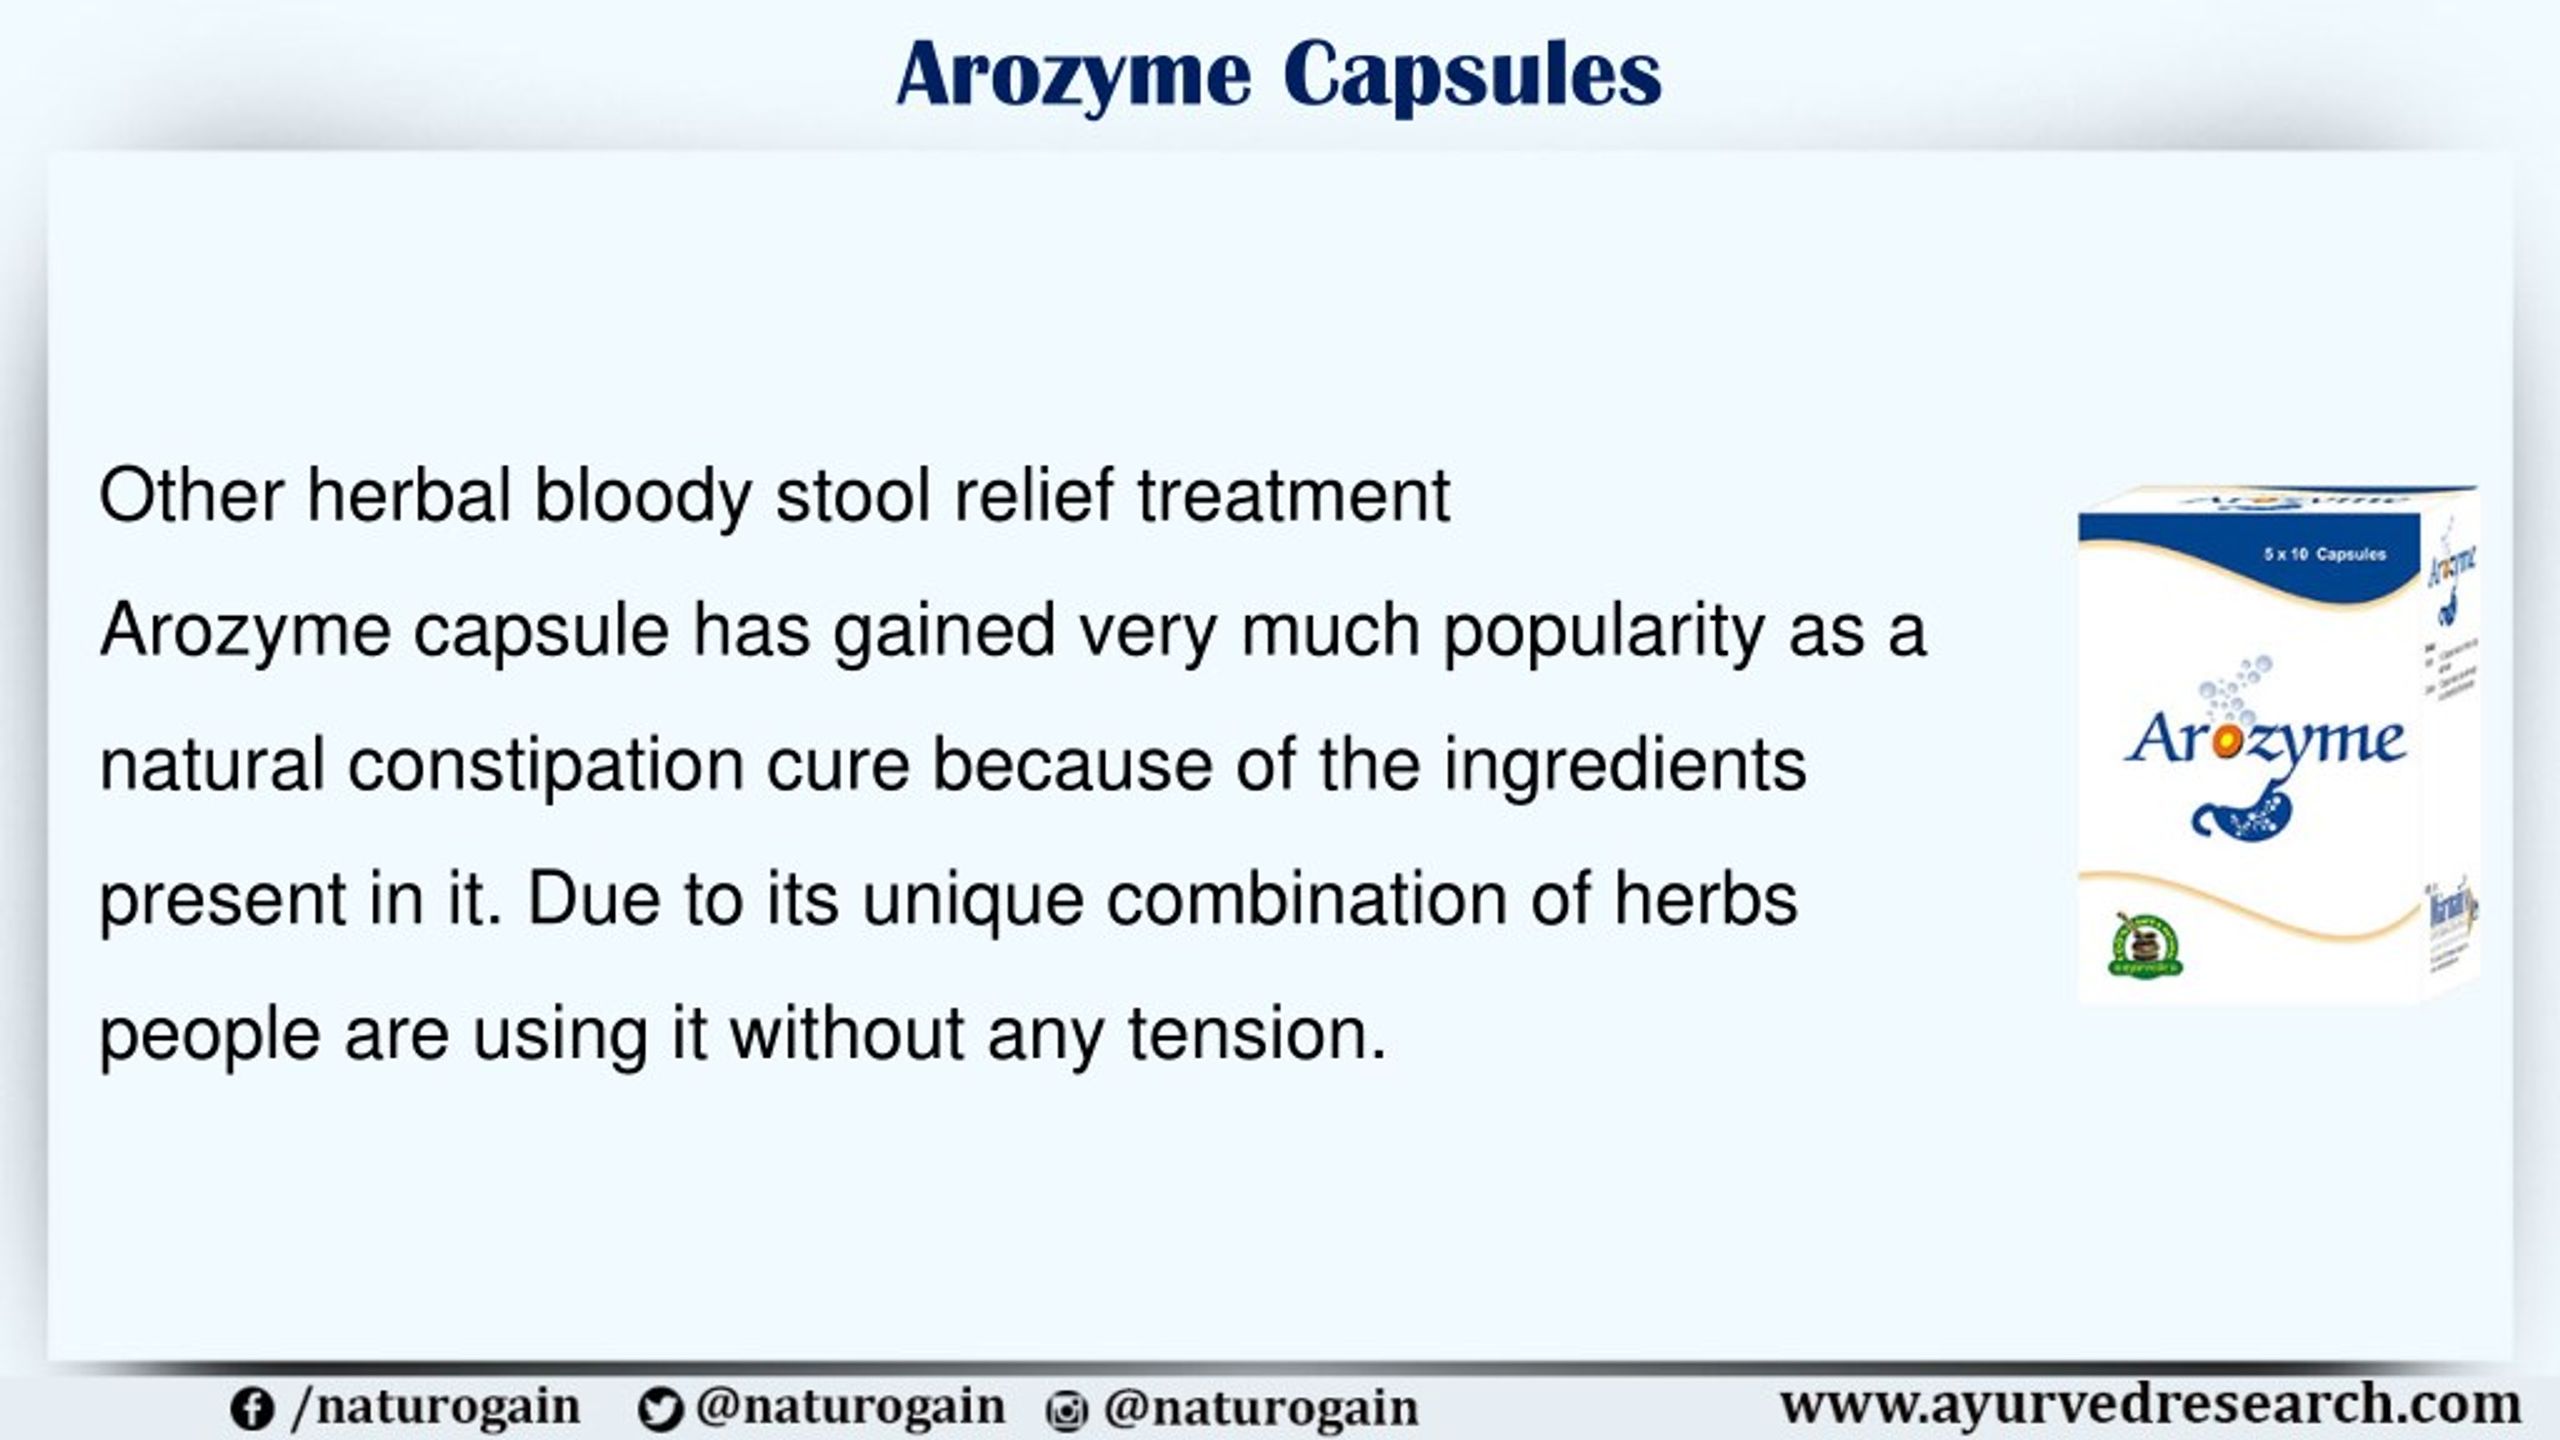 Ppt Natural Constipation Cure For Bloody Stool Relief Treatment